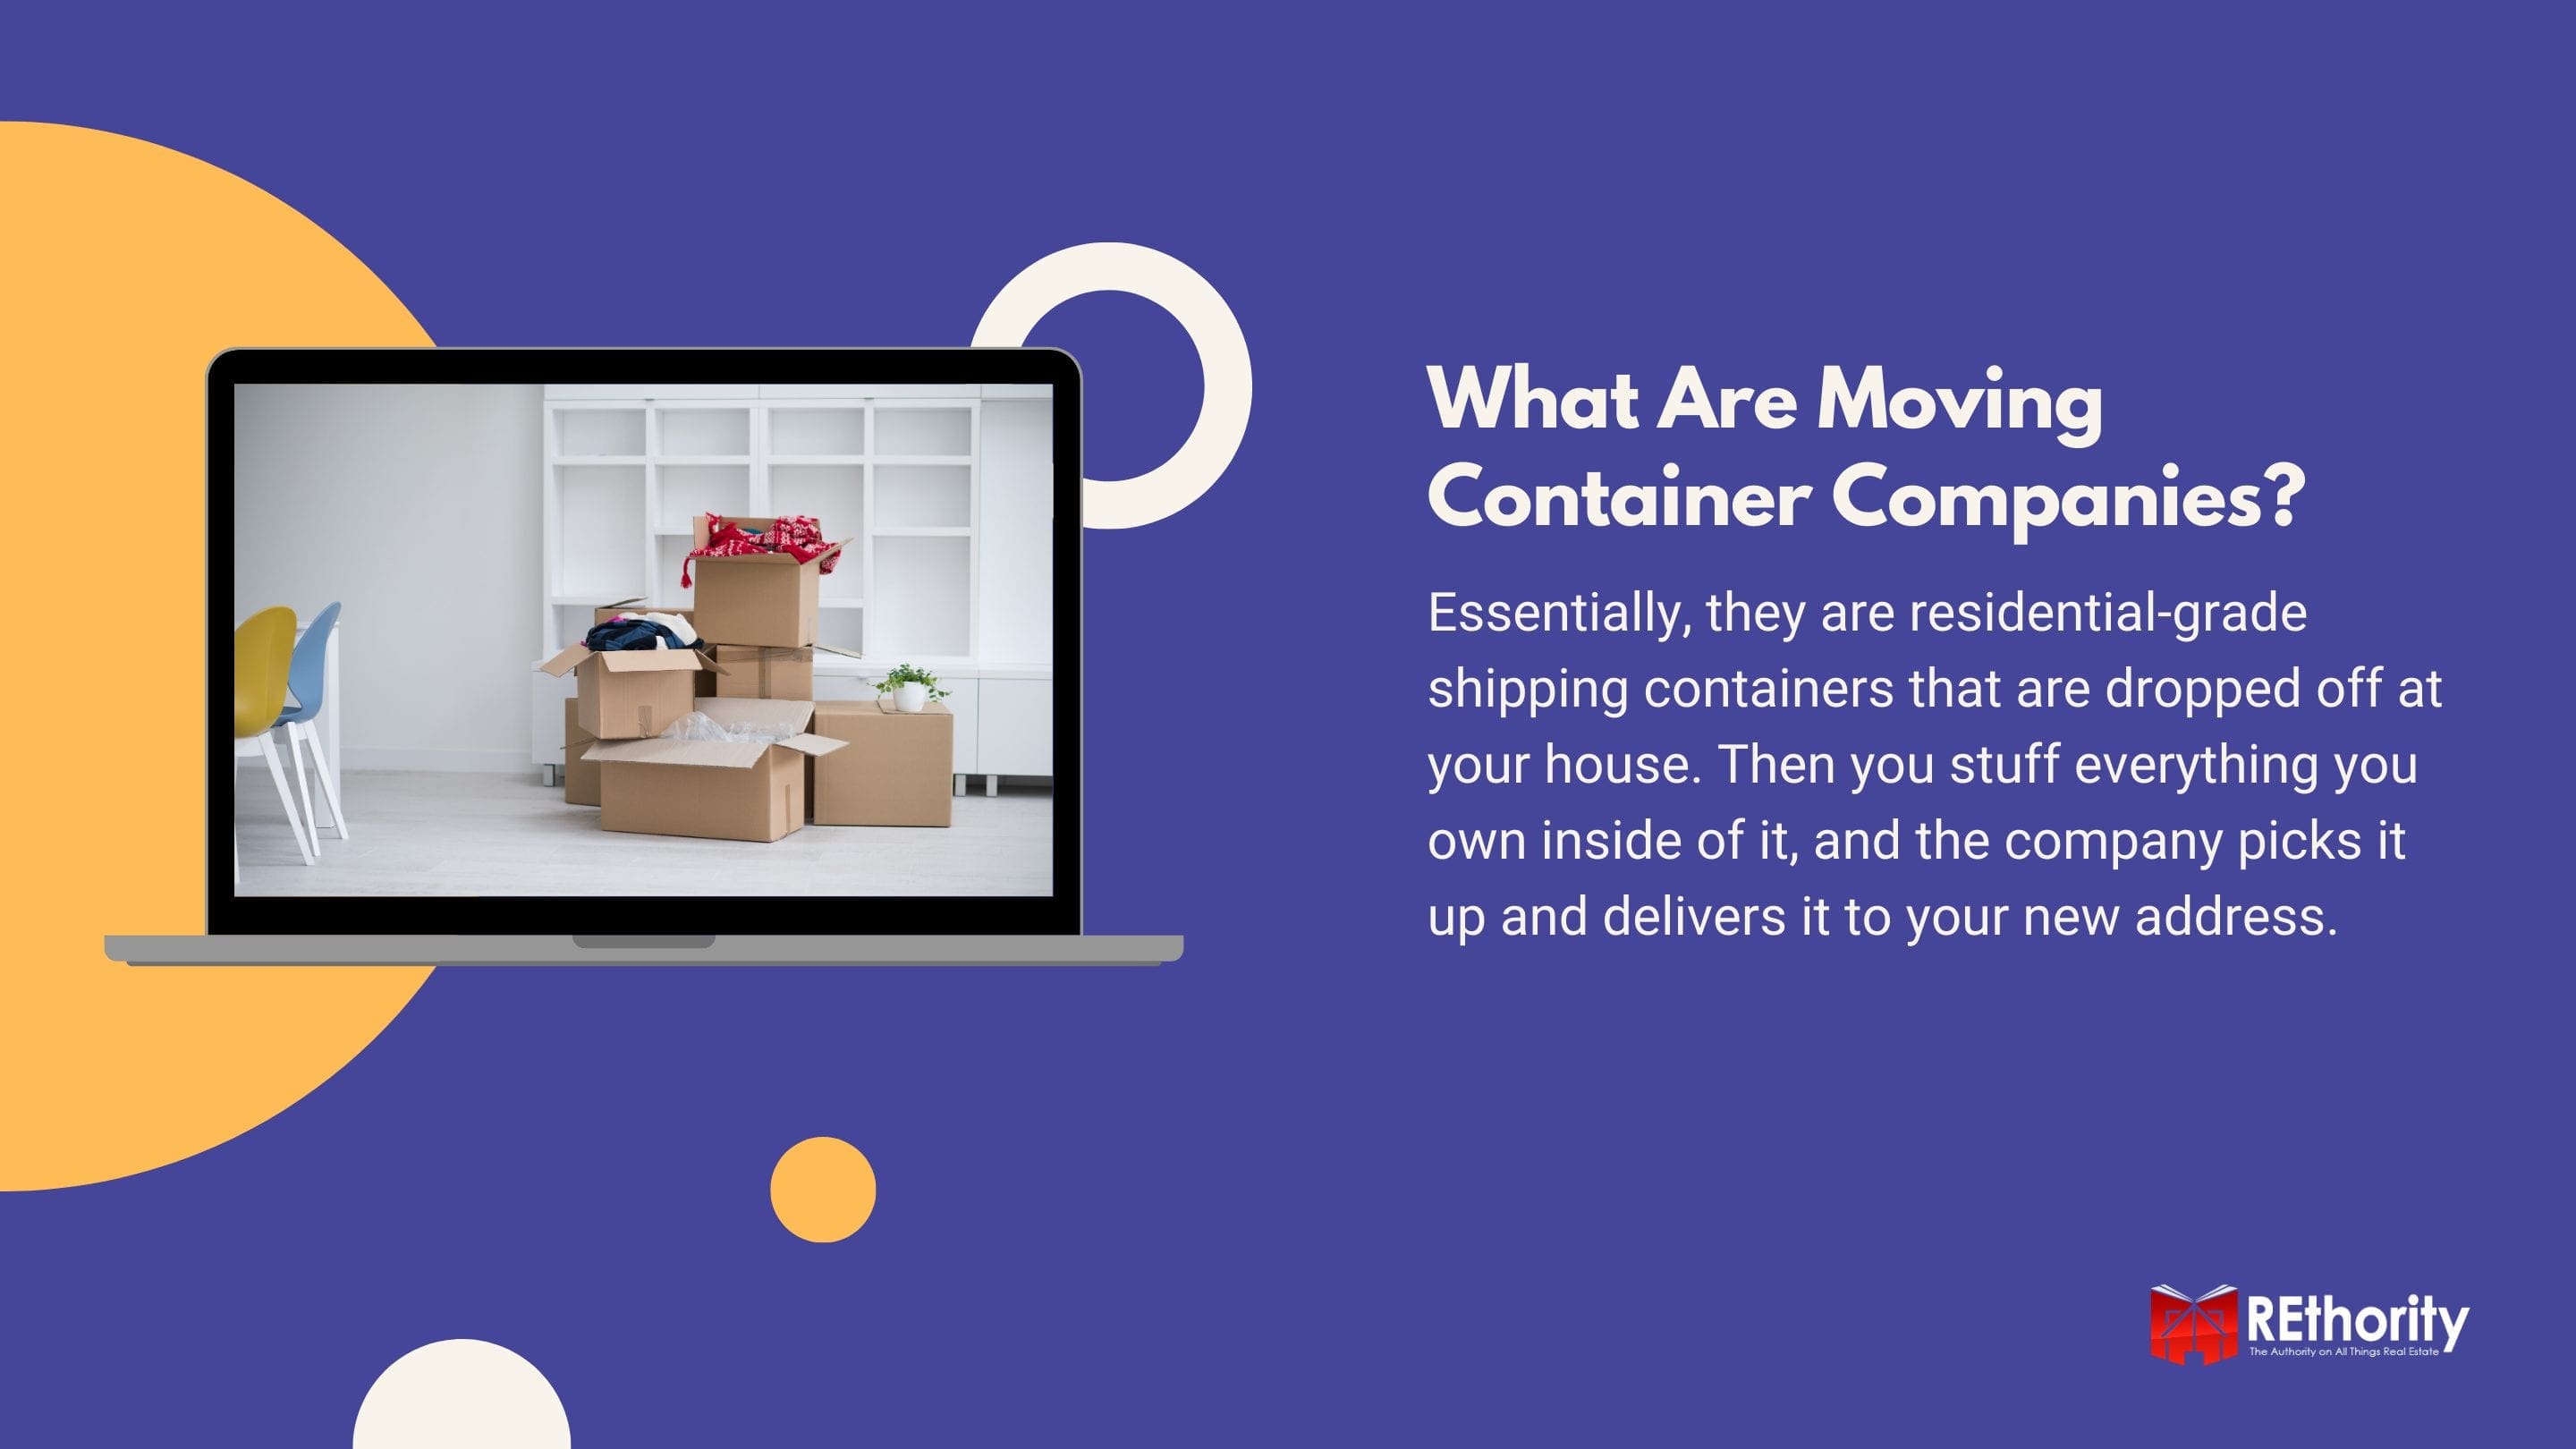 What Are Moving Container Companies graphic against blue background with a handful of personal items on the floor of an apartment